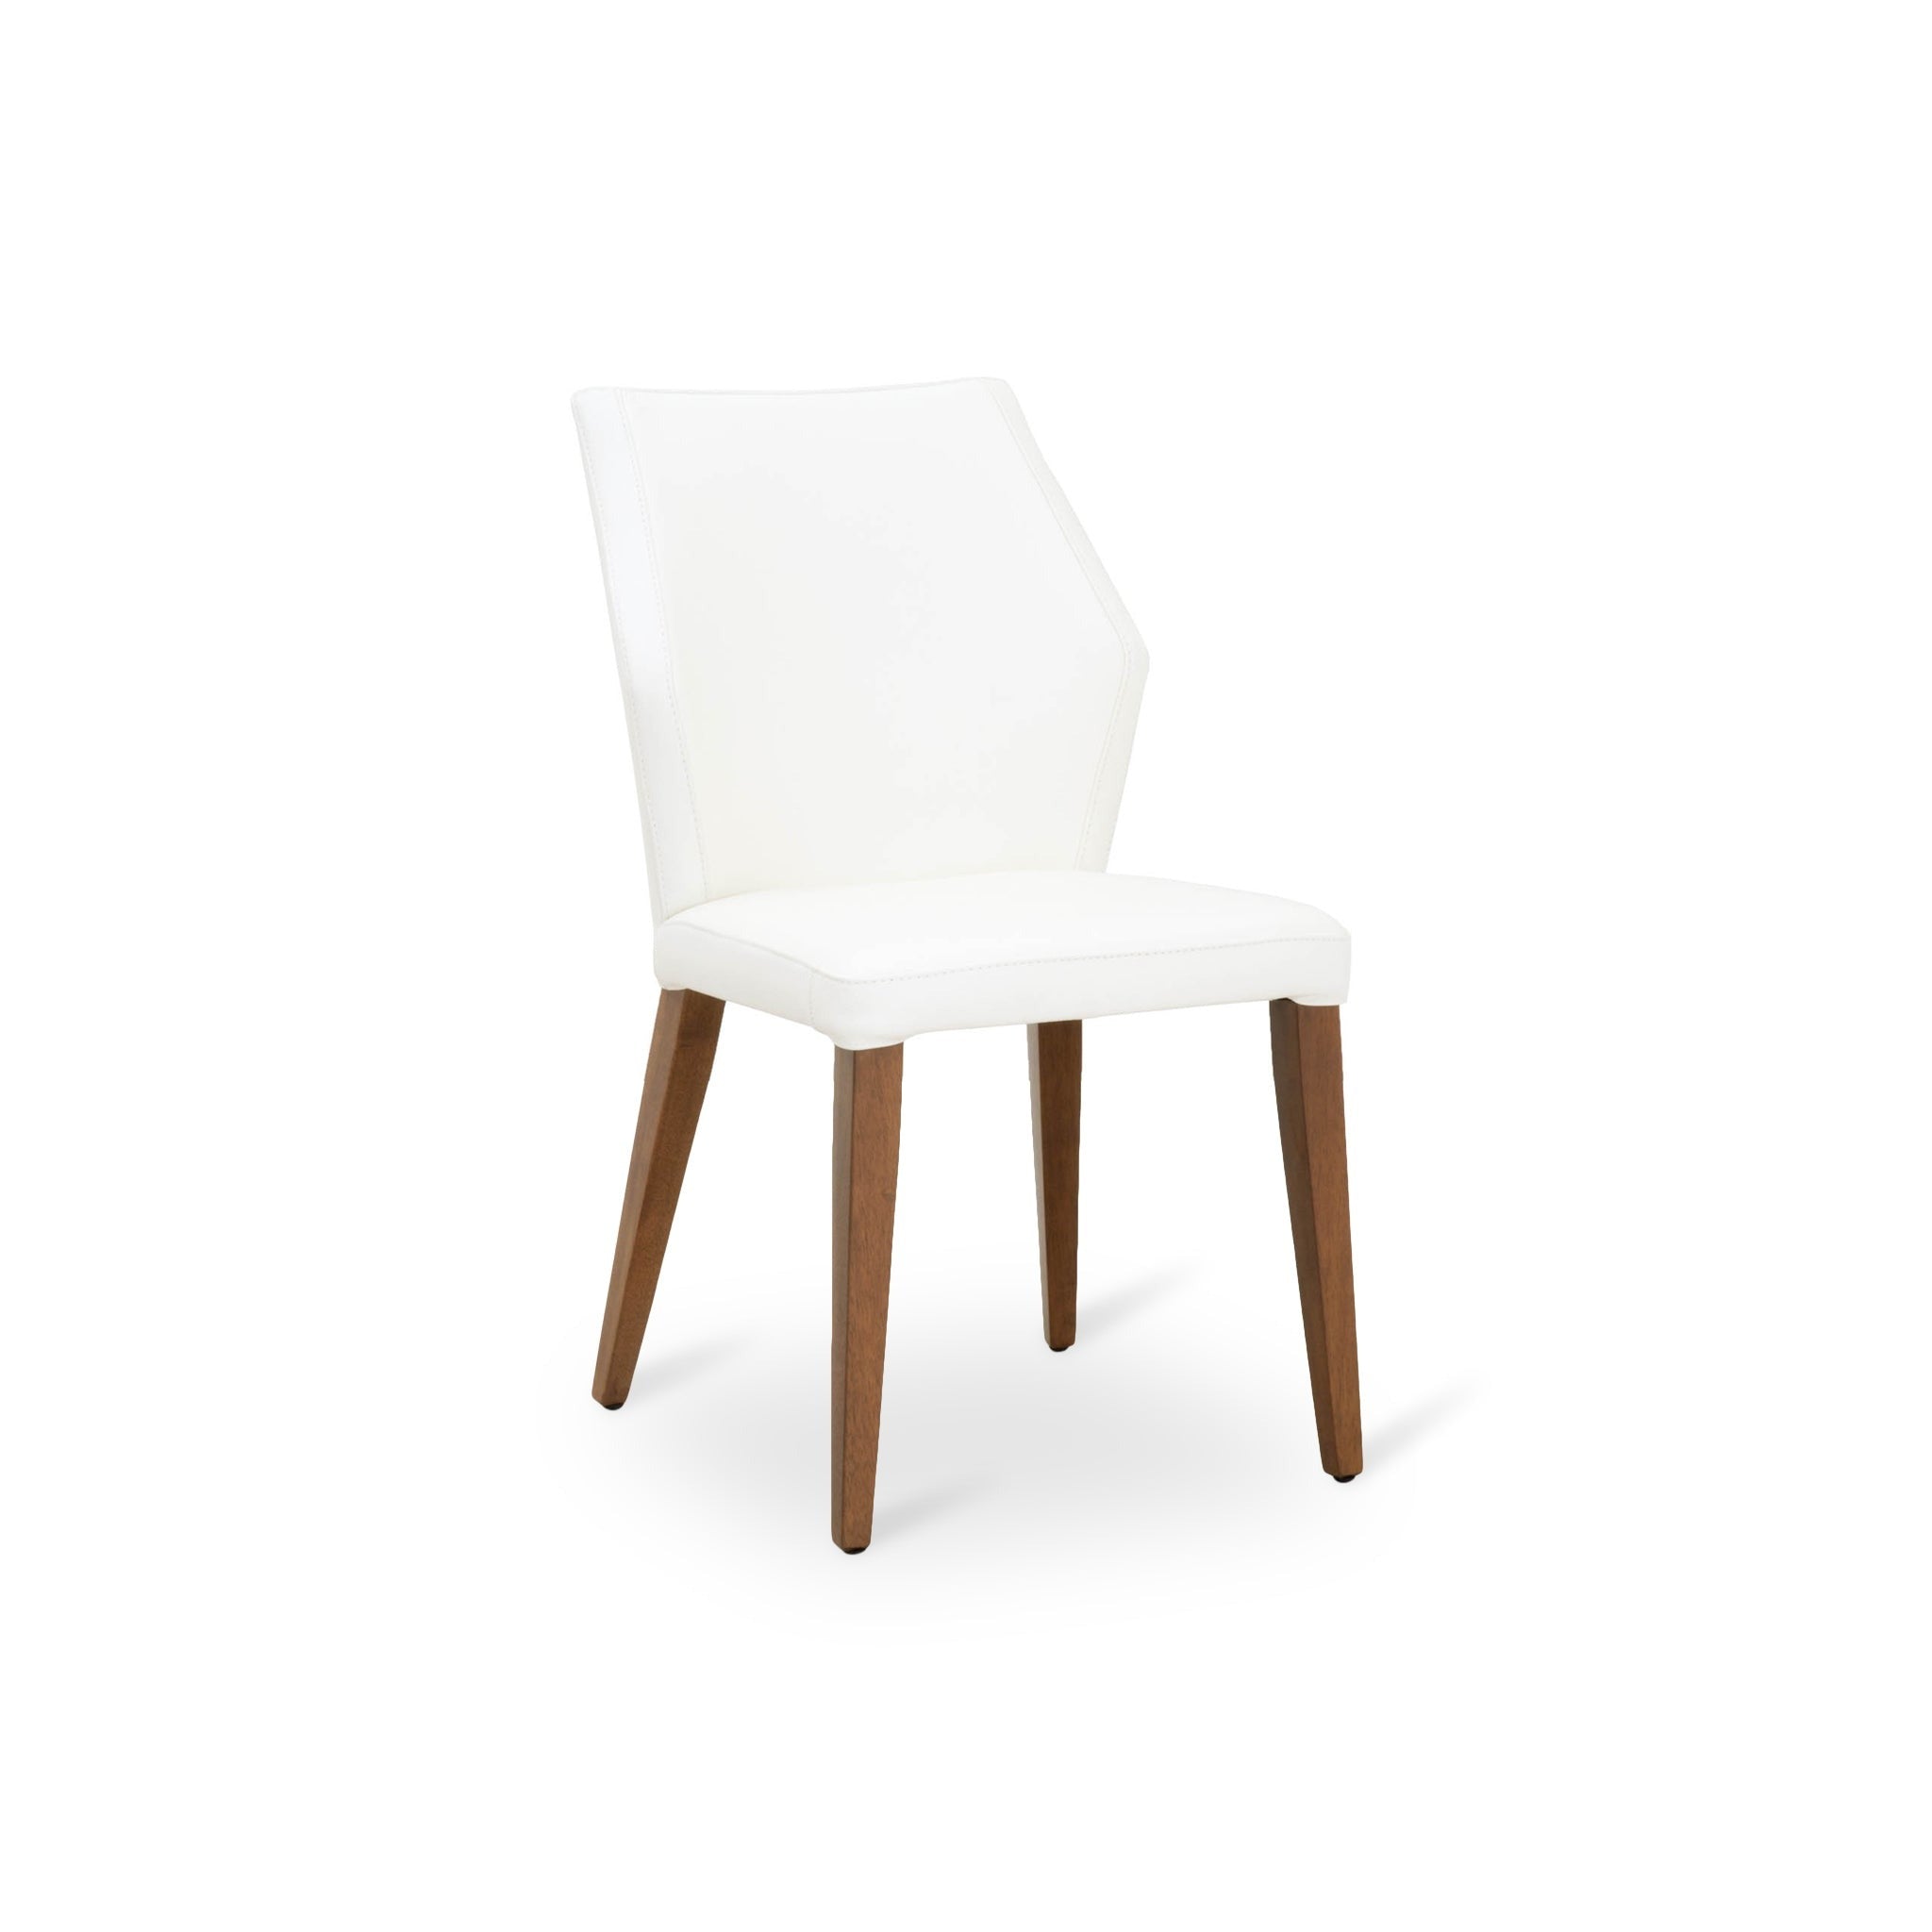 Laufen Dining Chair - Set of 2